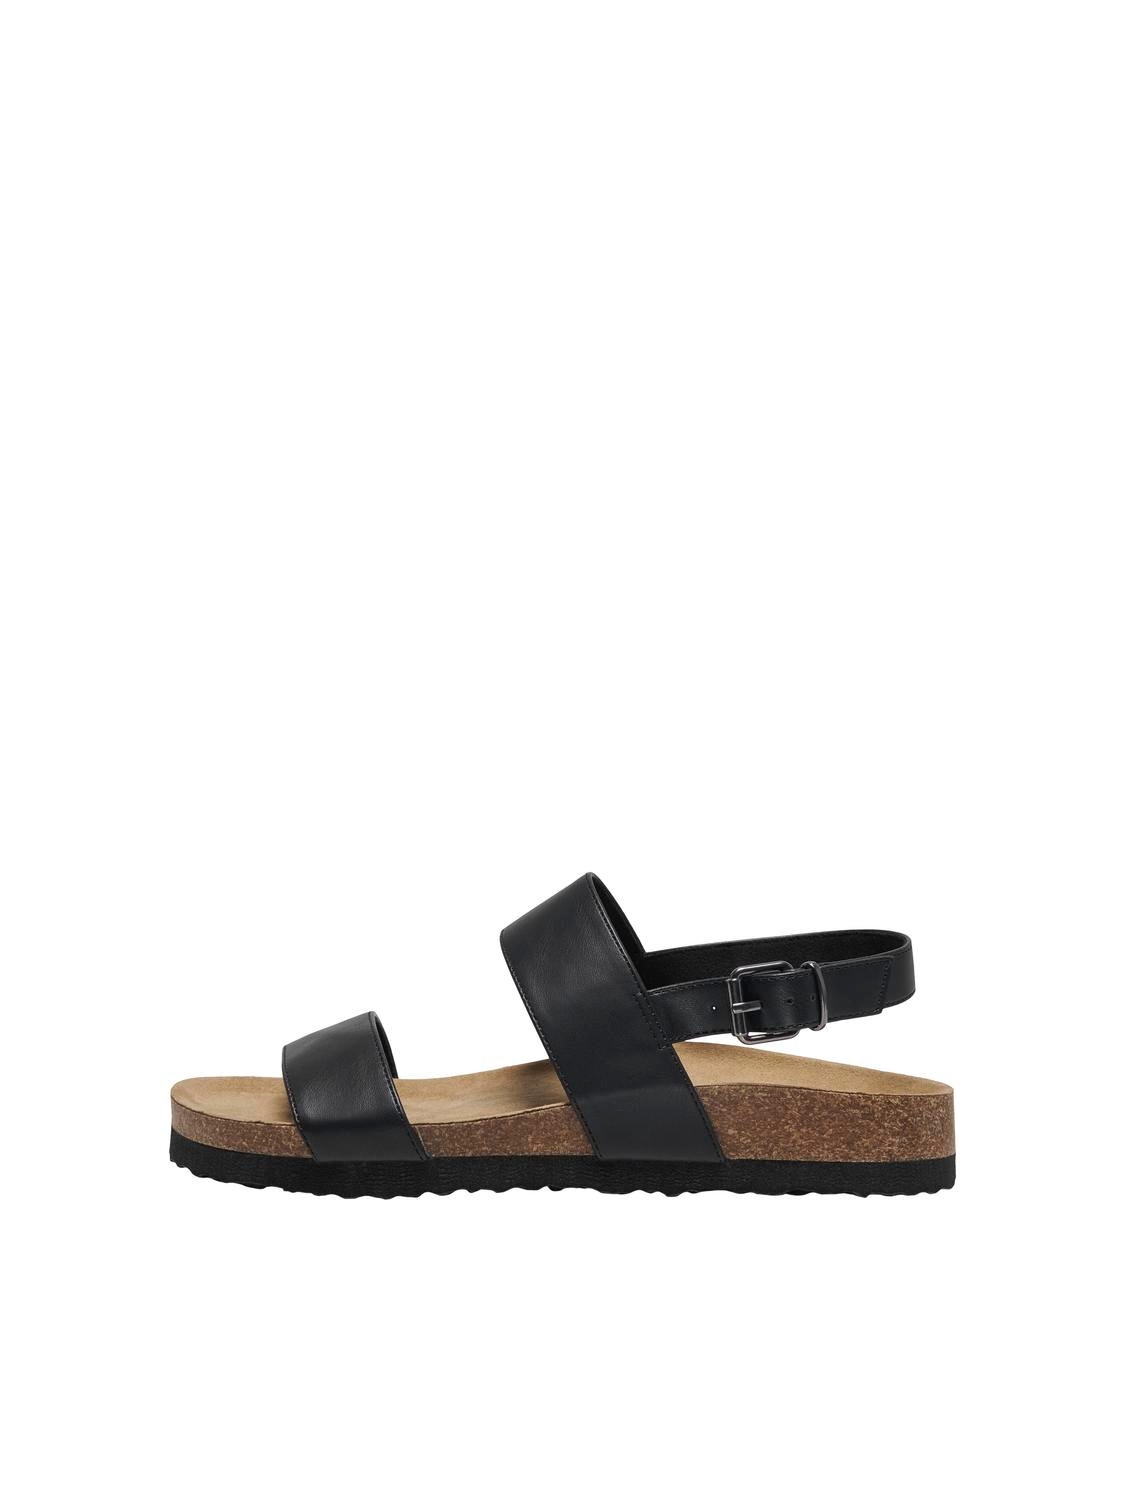 ONLY Sandals with buckle -Black - 15226582